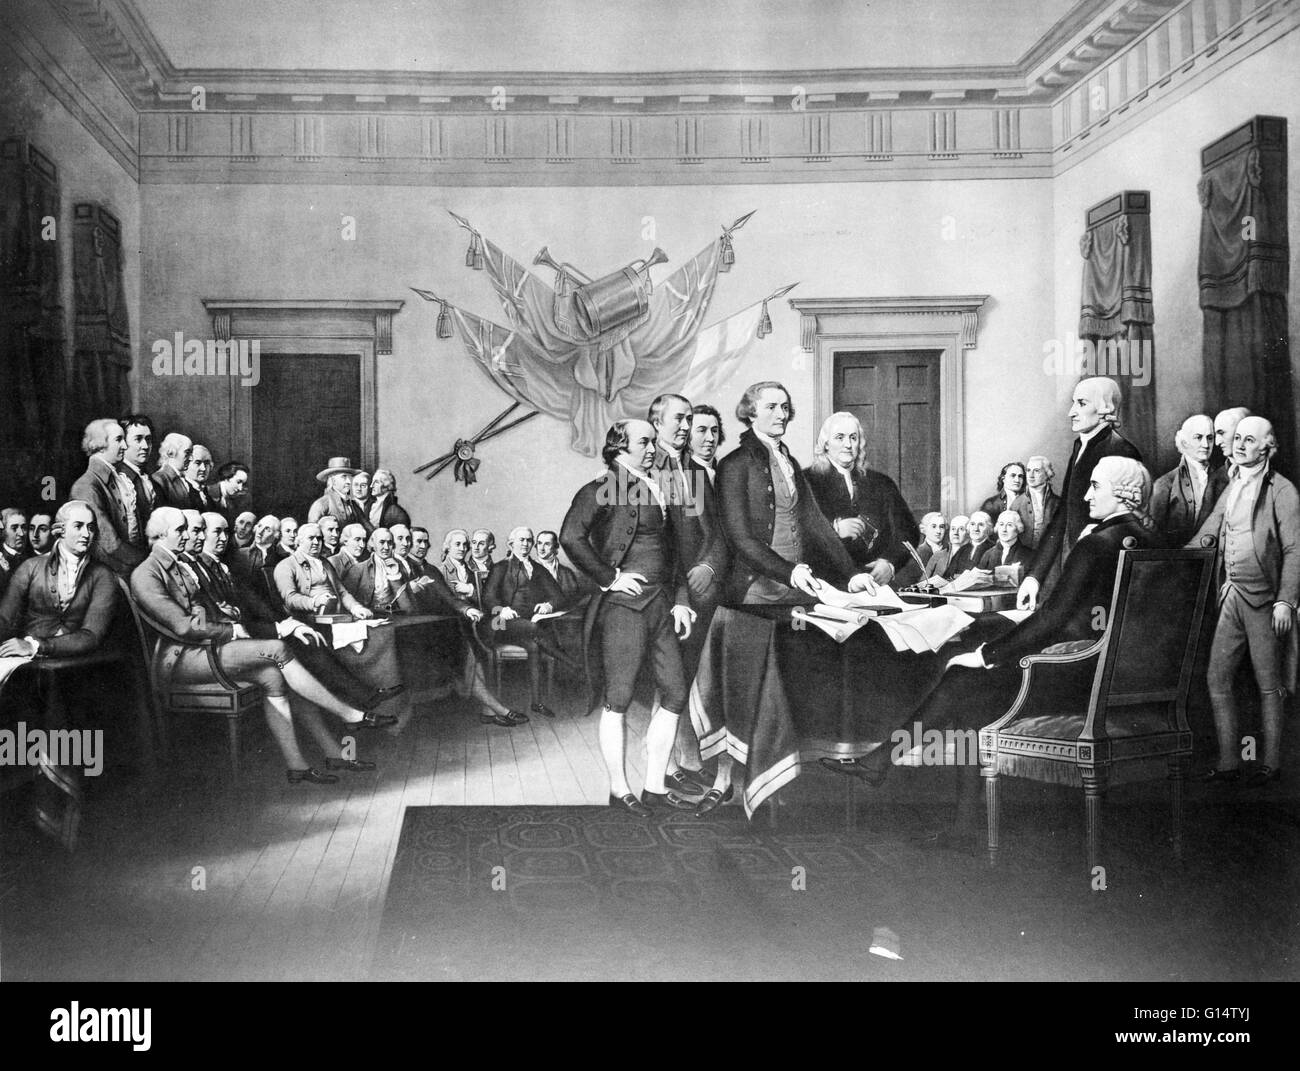 The signing of the Declaration of Independence on July 4, 1776 in Philadelphia. This original painting by John Trumbull hangs on display in the U.S. Capitol. Stock Photo